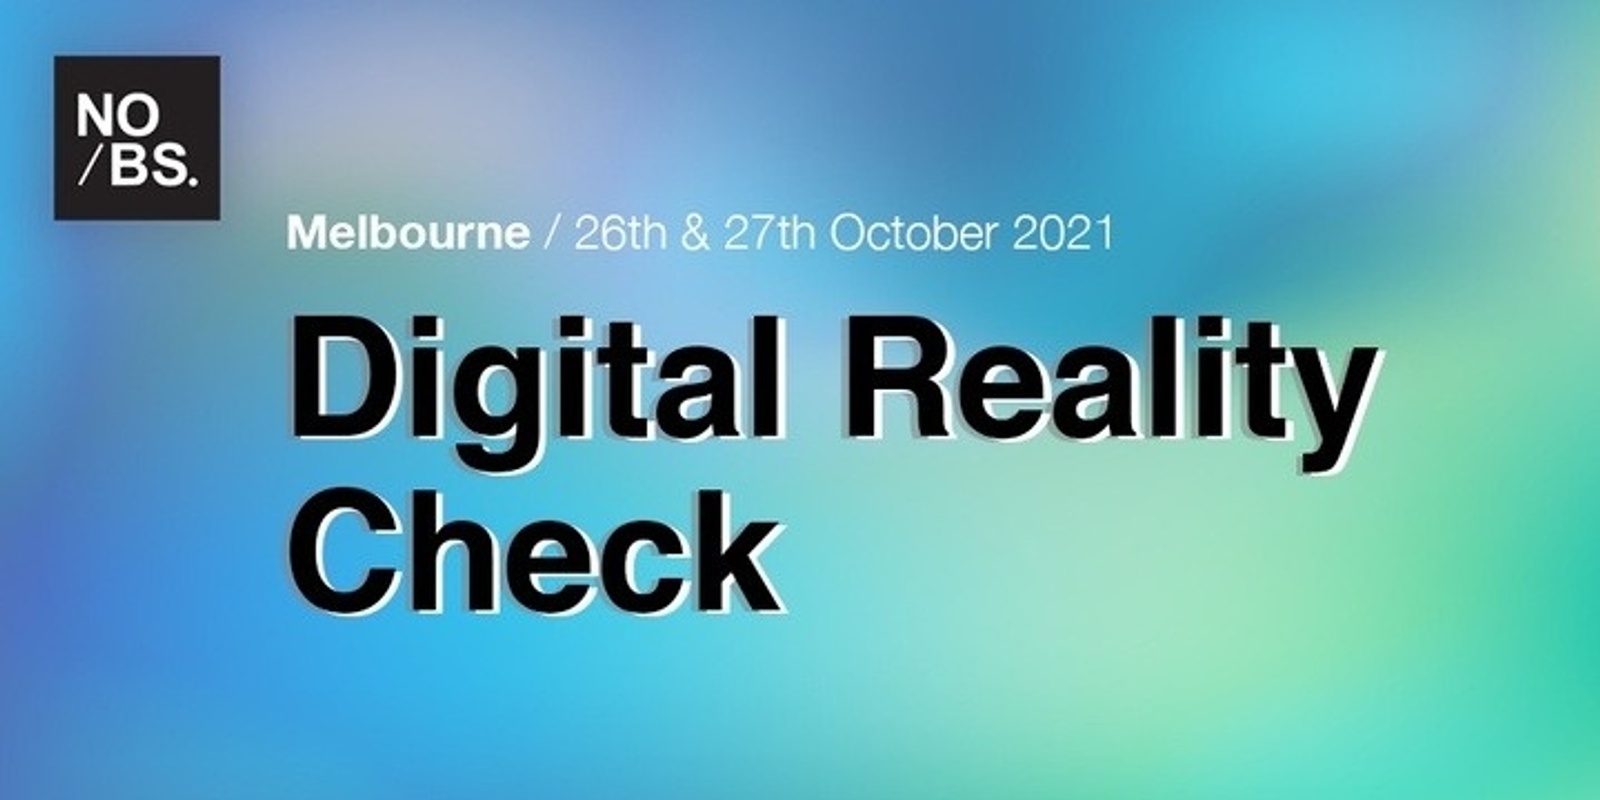 Banner image for NO/BS - Digital Reality Check Conference